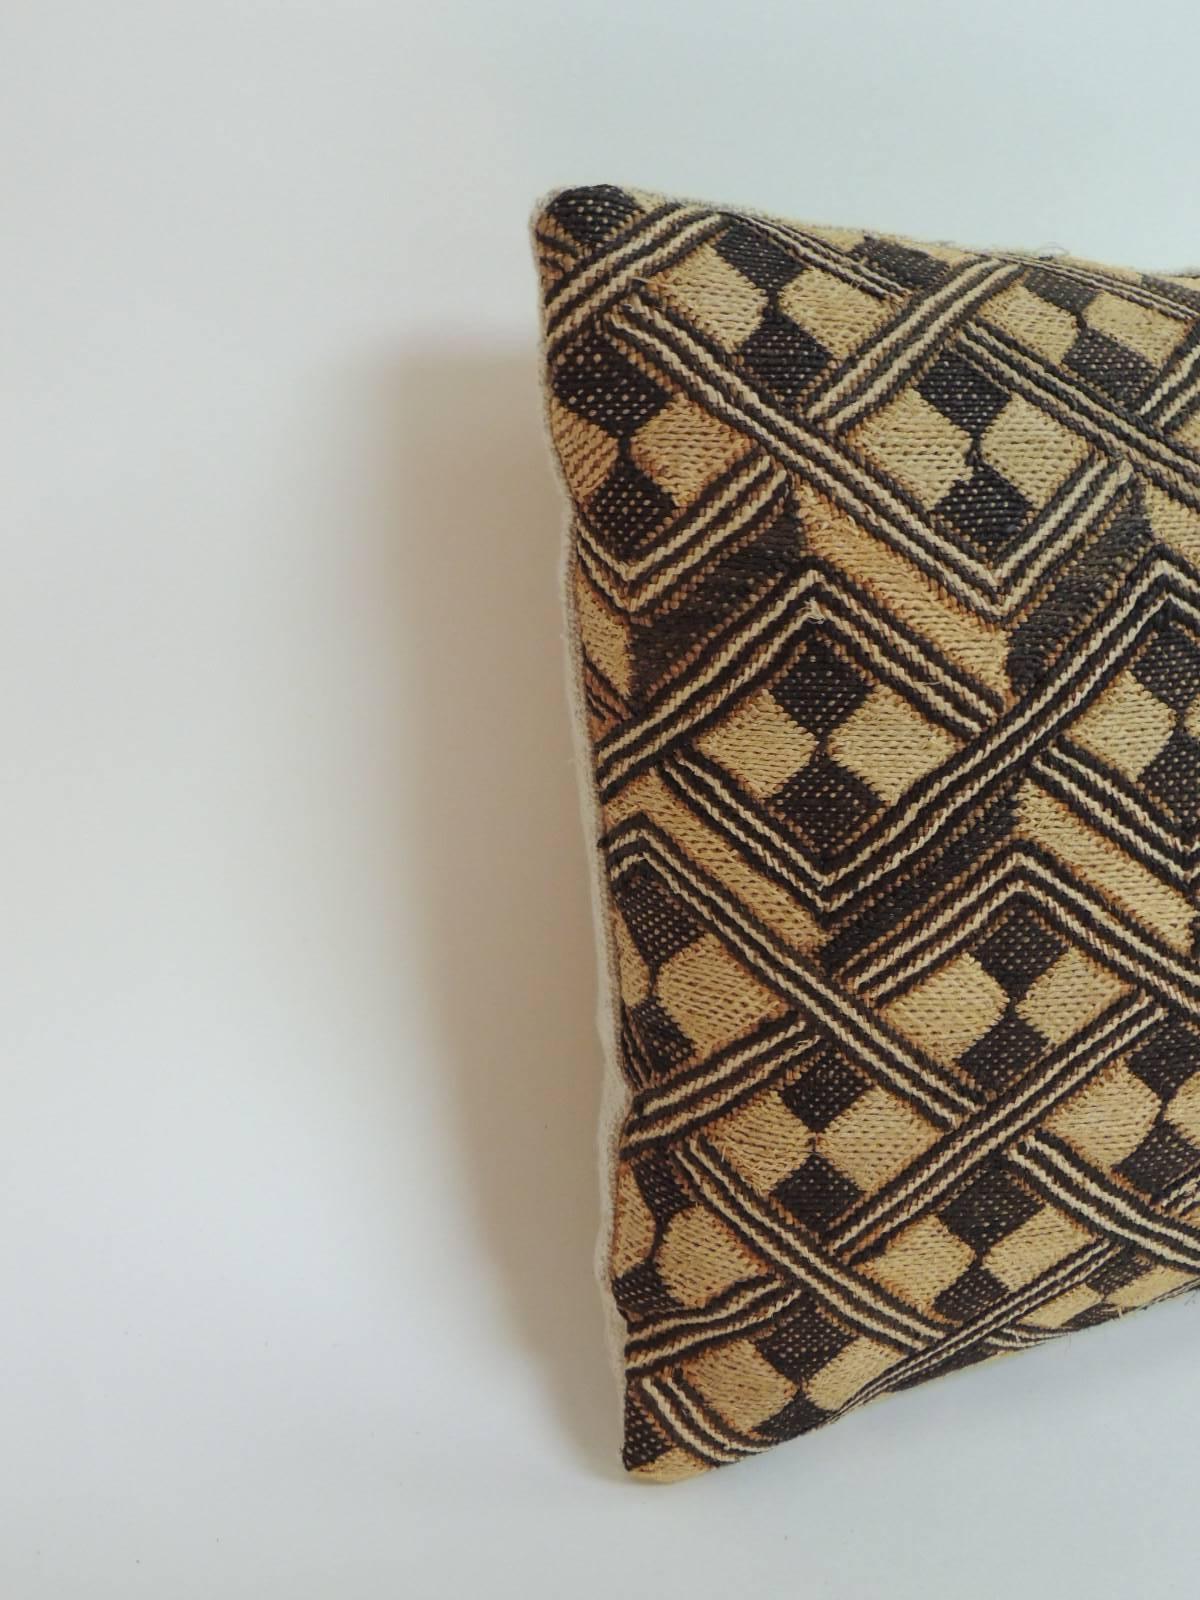 Hand-Crafted Vintage Handwoven Orange and Brown African Tribal Decorative Lumbar Pillow